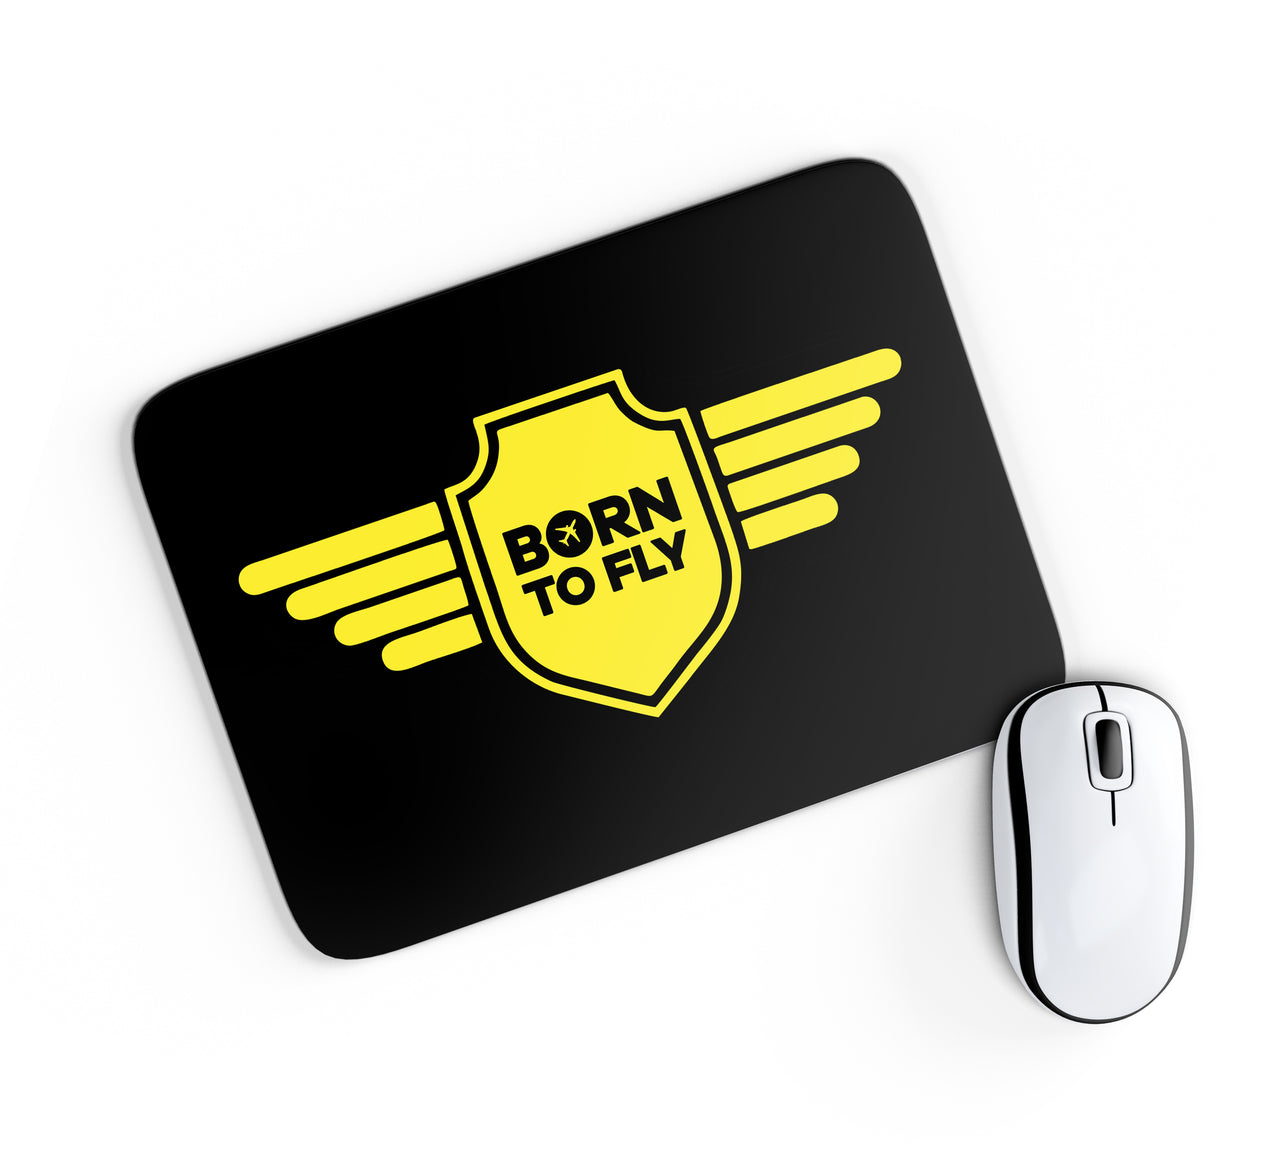 Born To Fly & Badge Designed Mouse Pads